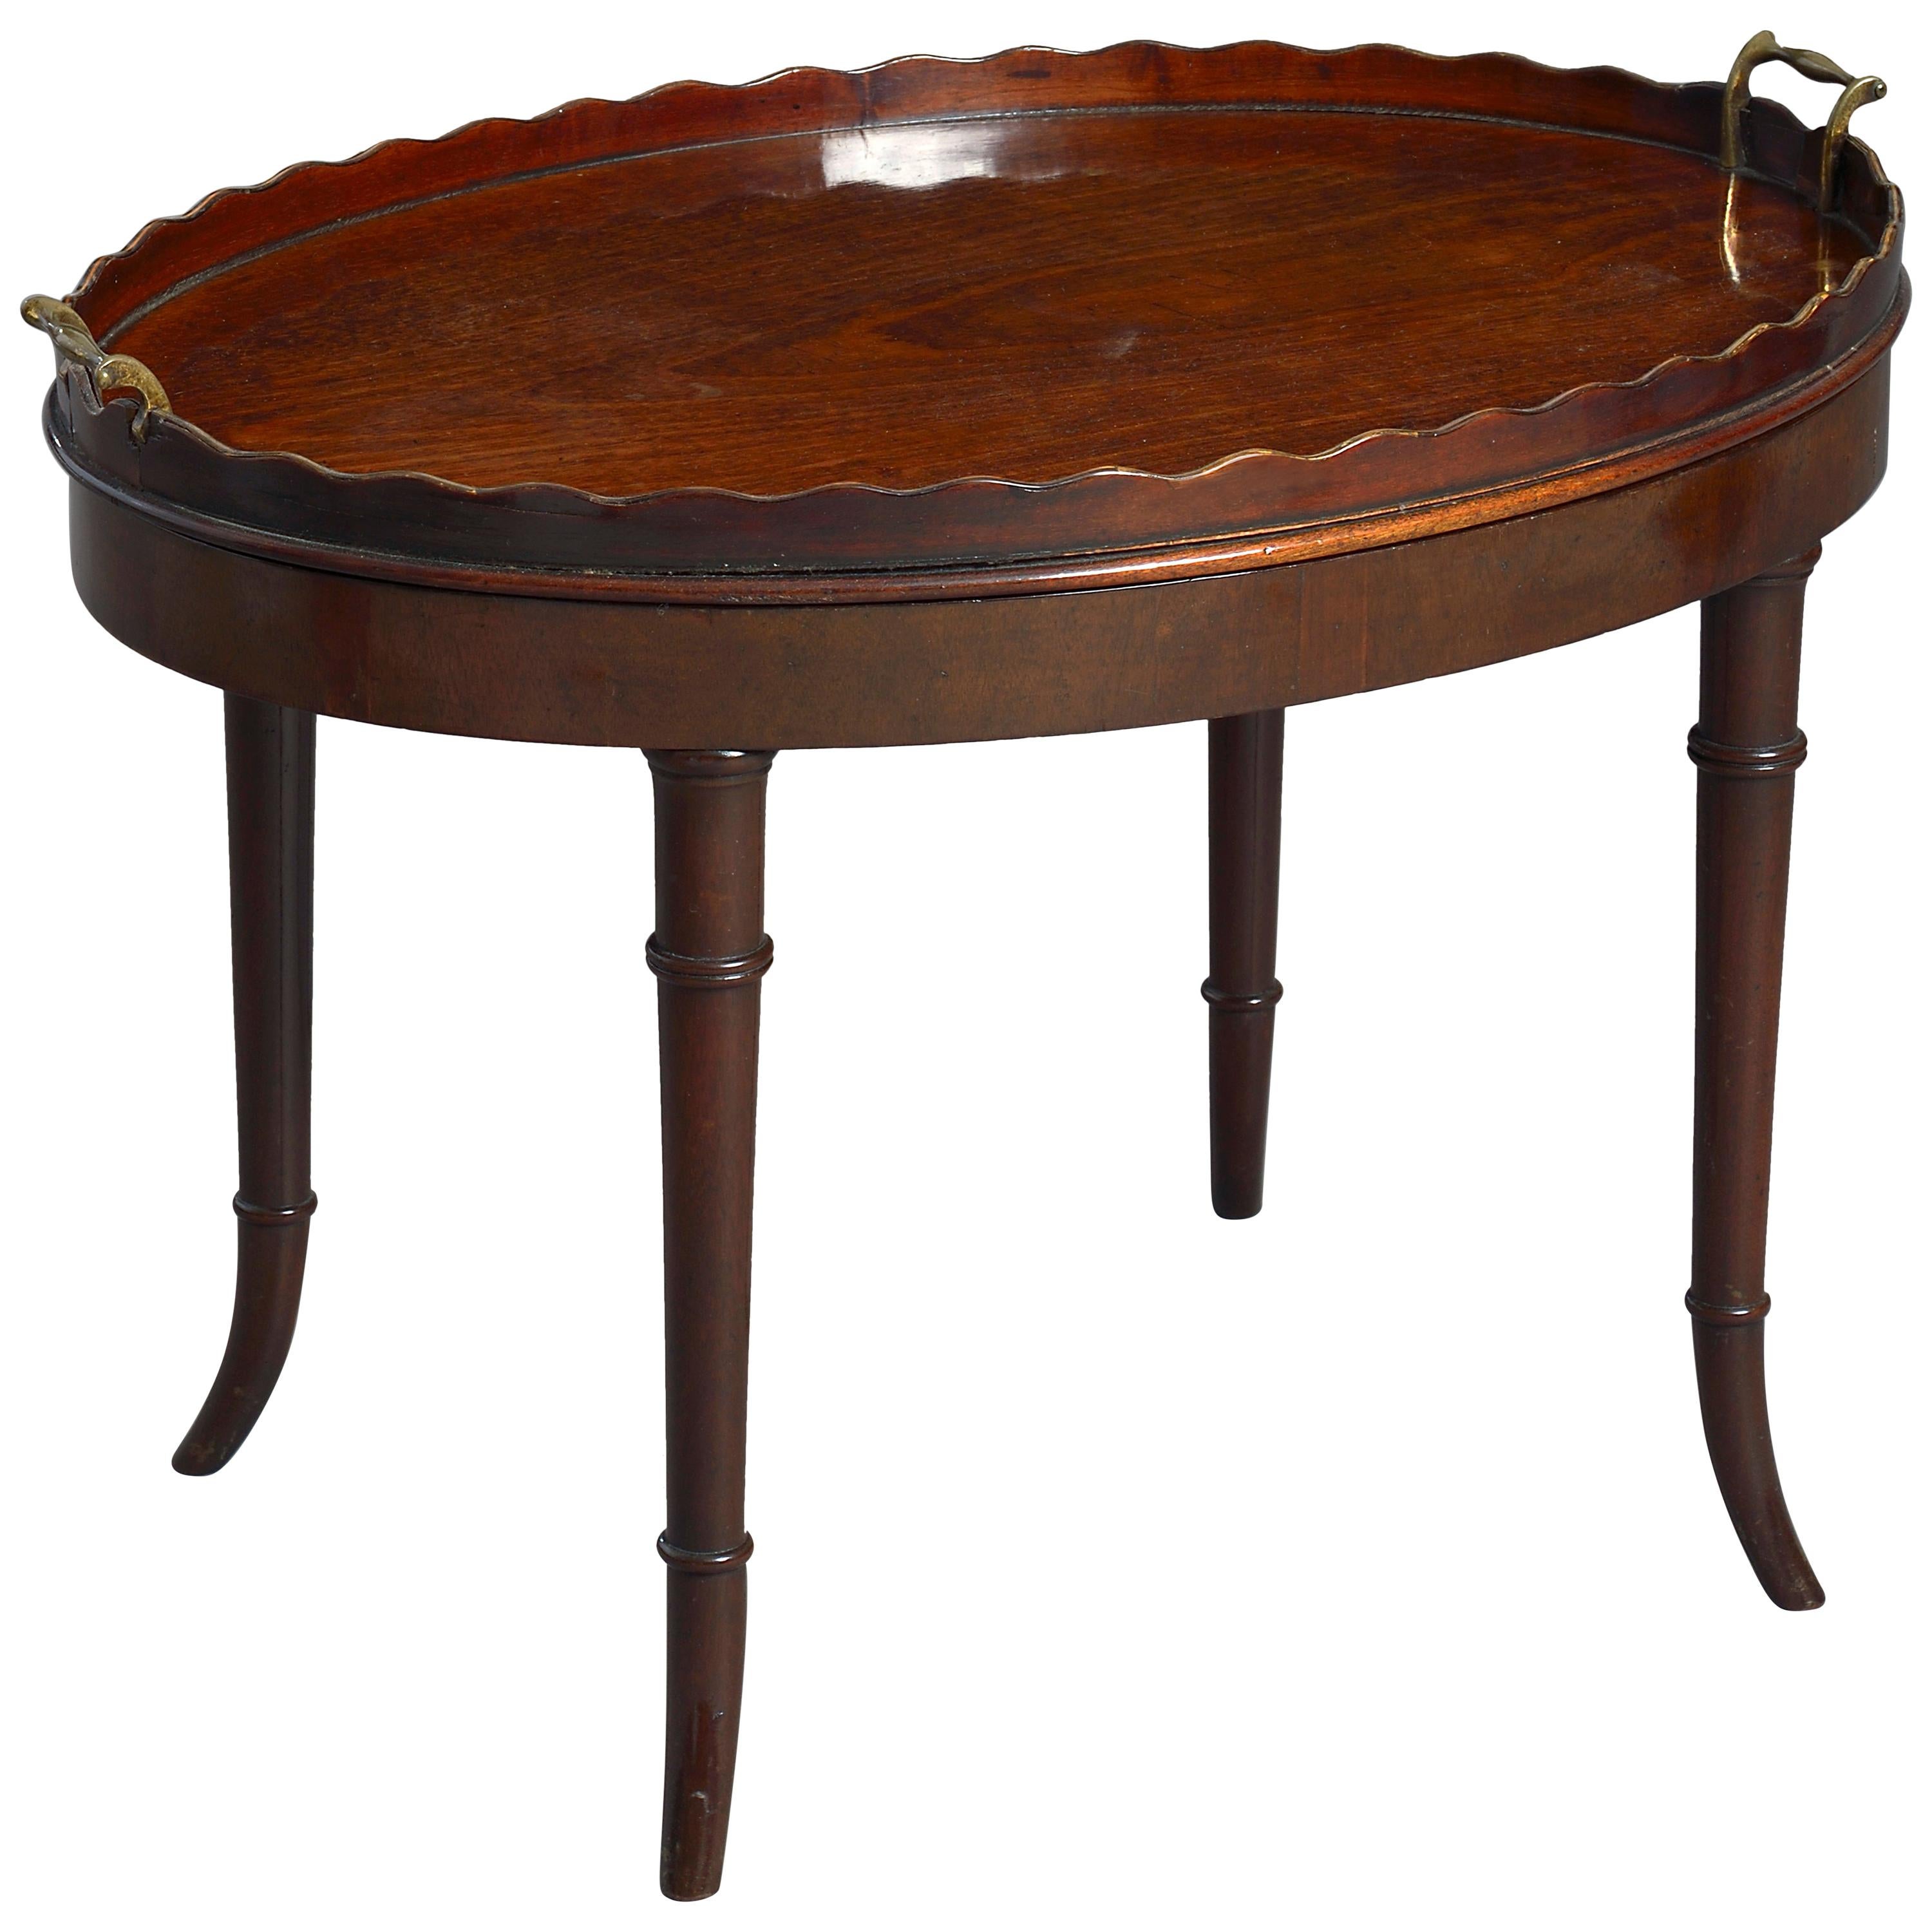 Early 19th Century George III Period Mahogany Tray as a Low Table